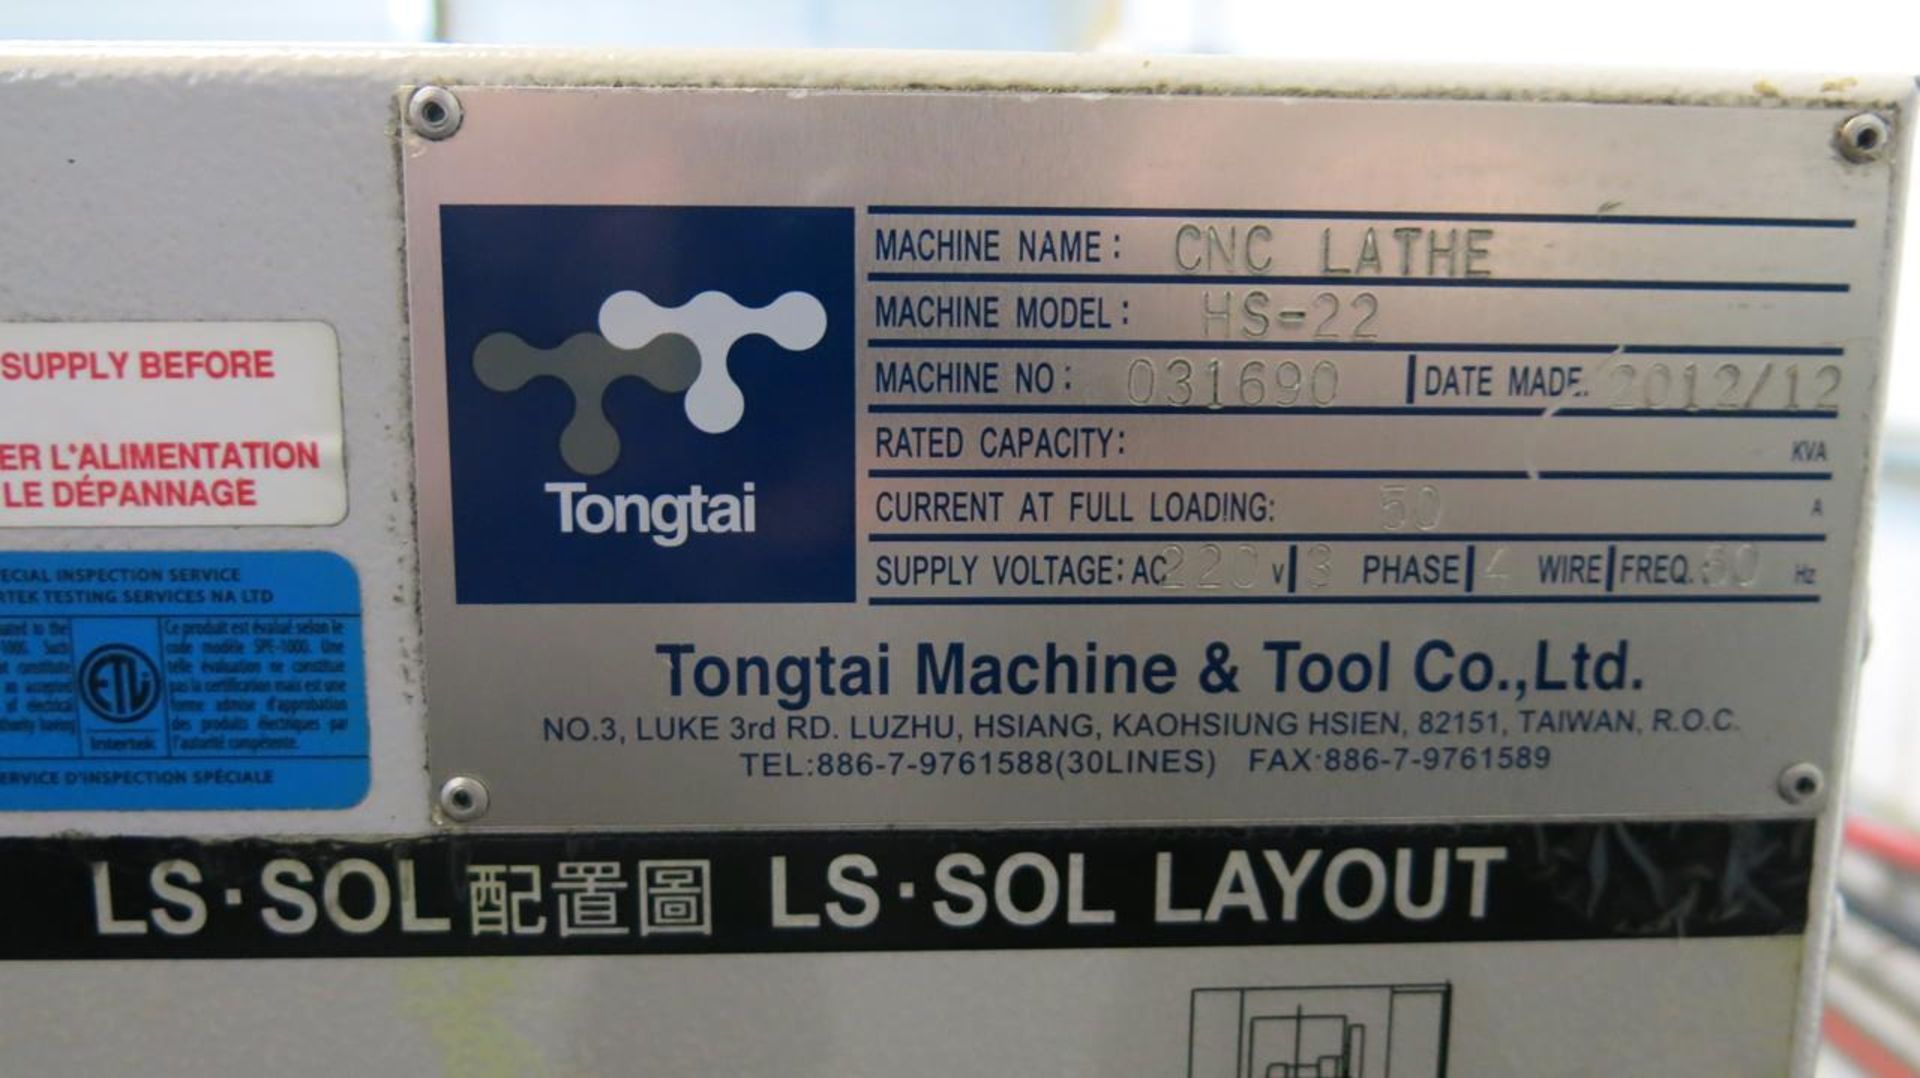 2012, TONGTAI MACHINE CO., HS-22, CNC PRECISION LATHE, 15 HP SPINDLE, 6000 RPM SPINDLE, 6" DIA 3 JAW - Image 9 of 9